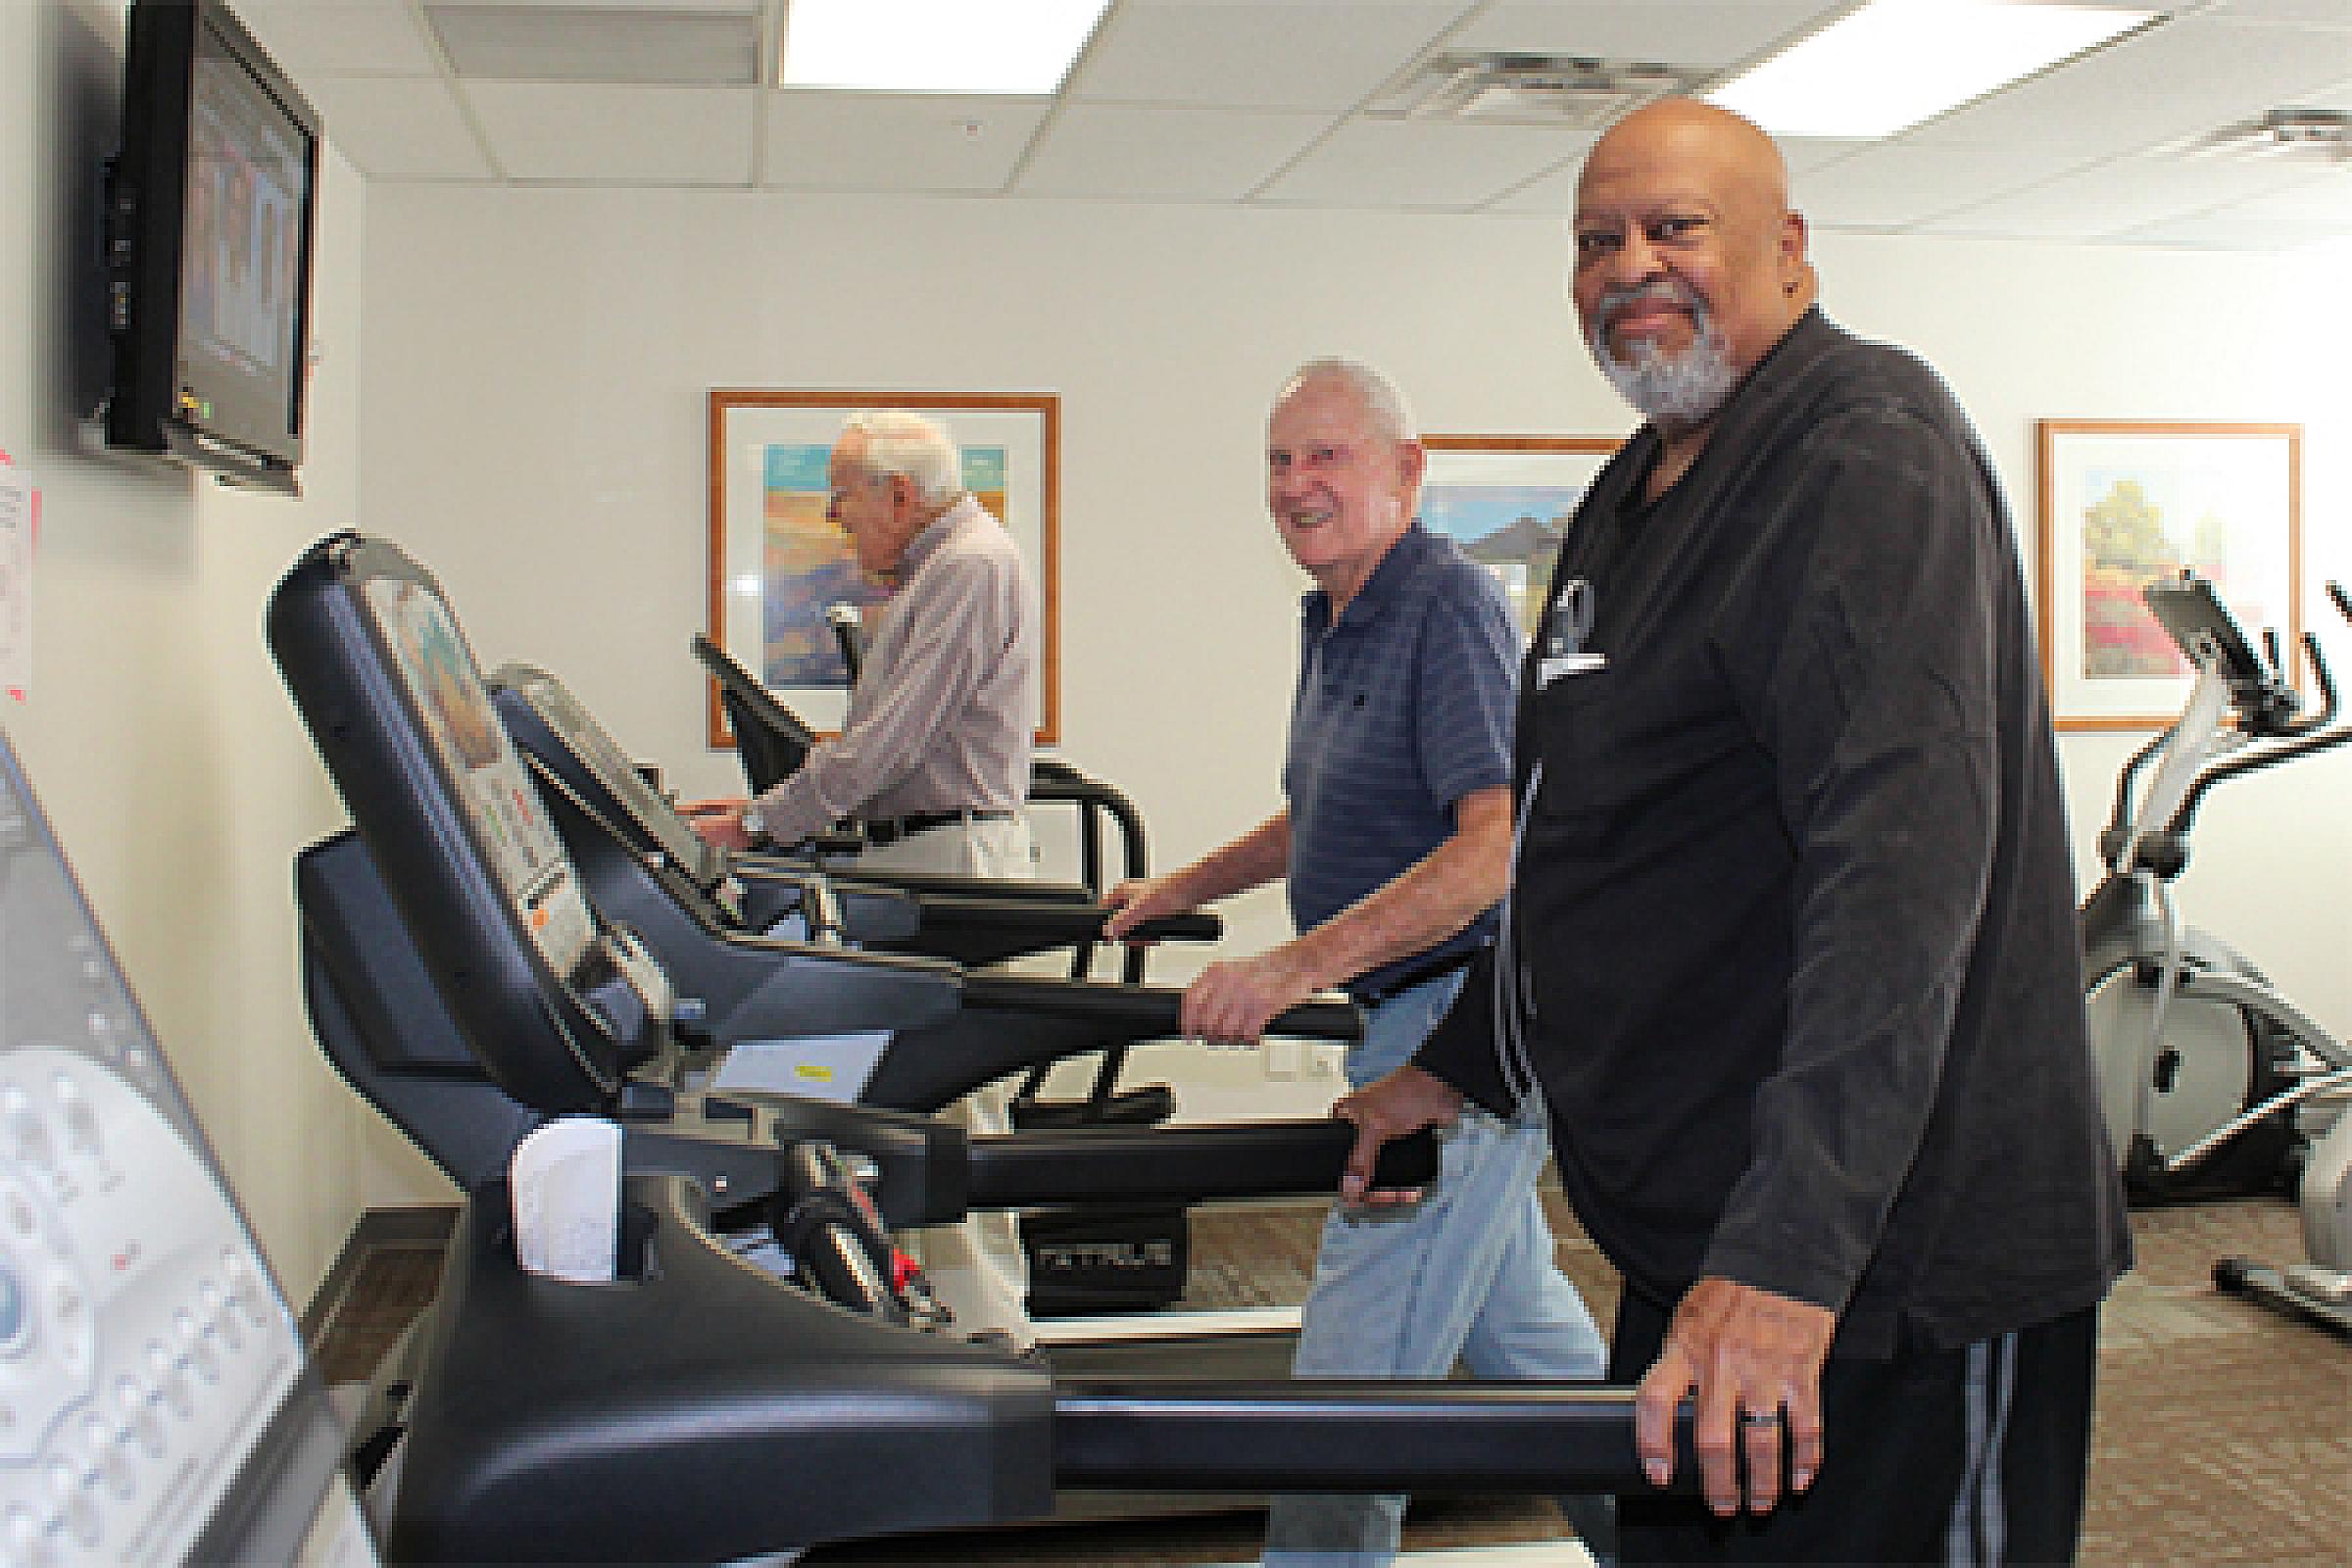 Cardiac rehabilitation patient at work in the gym